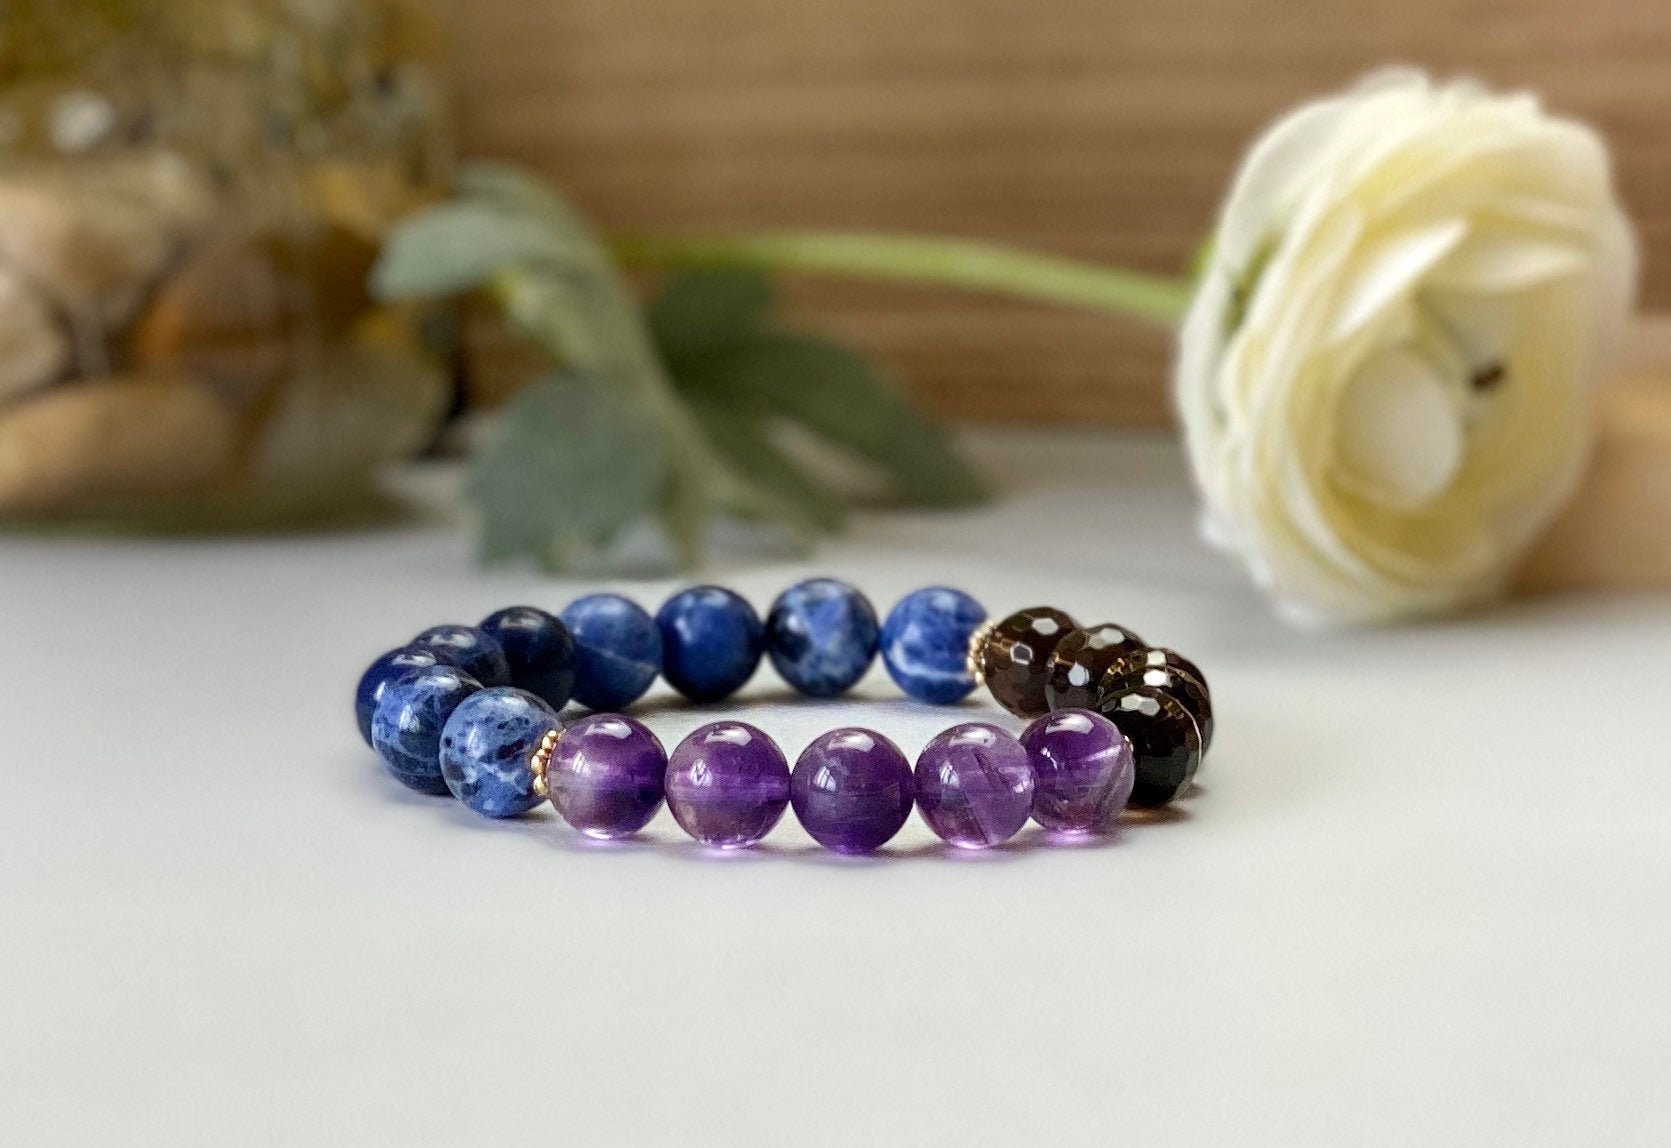 10mm Amethyst & Sodalite With Faceted Smoky Quartz. Powerful - Etsy